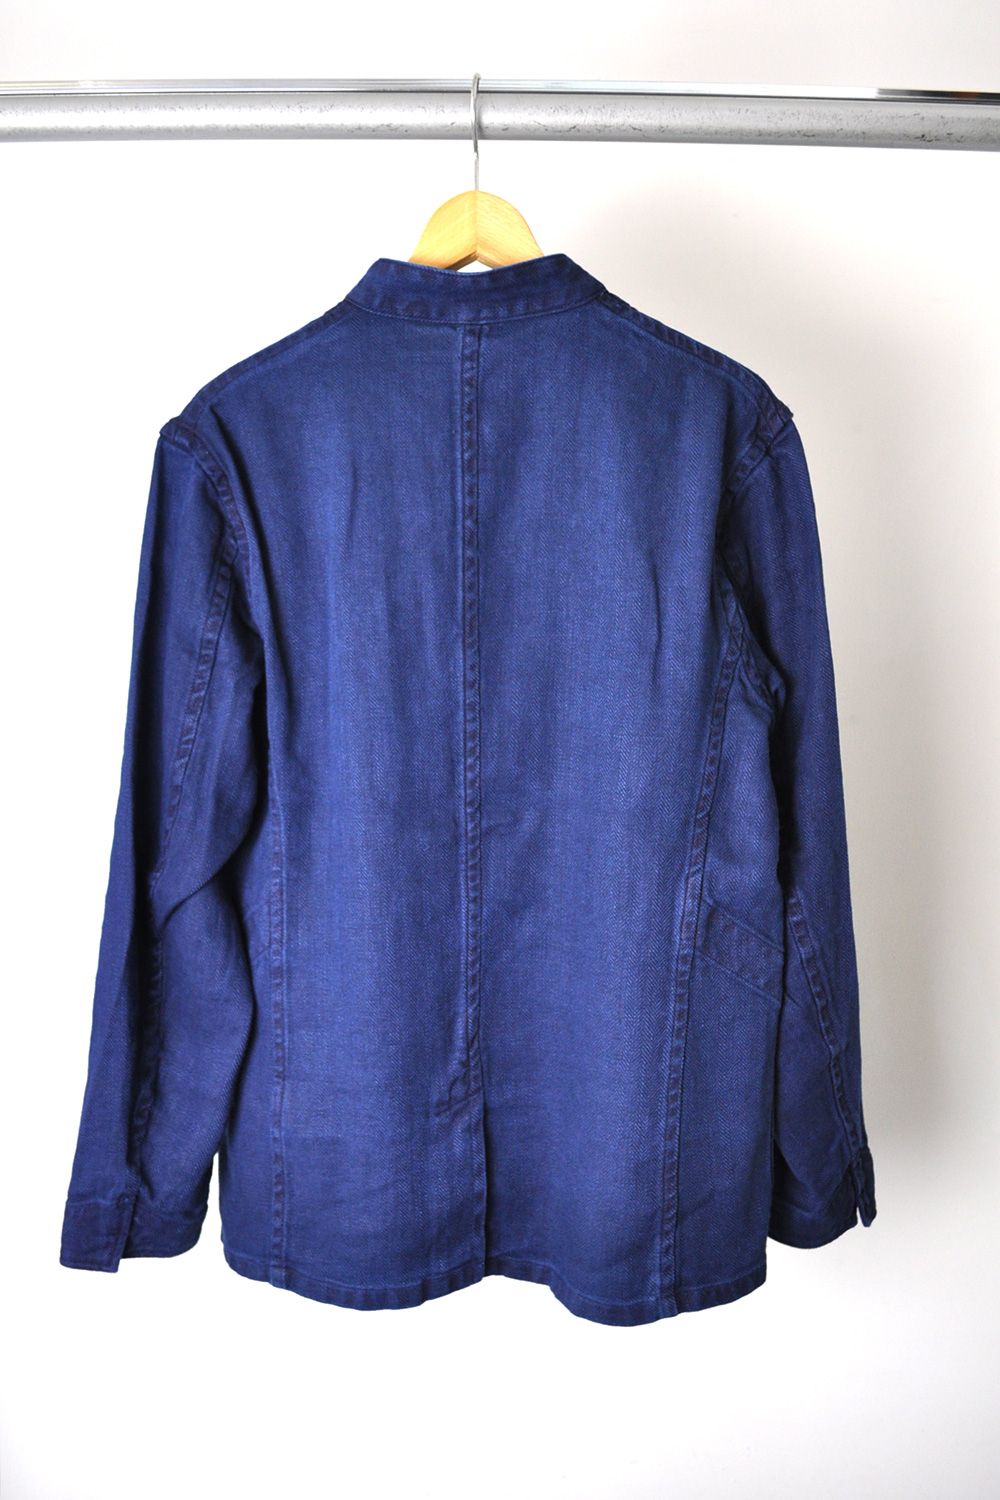 Ets.MATERIAUX - French Work Jacket / BLUE | Stripe Online Store